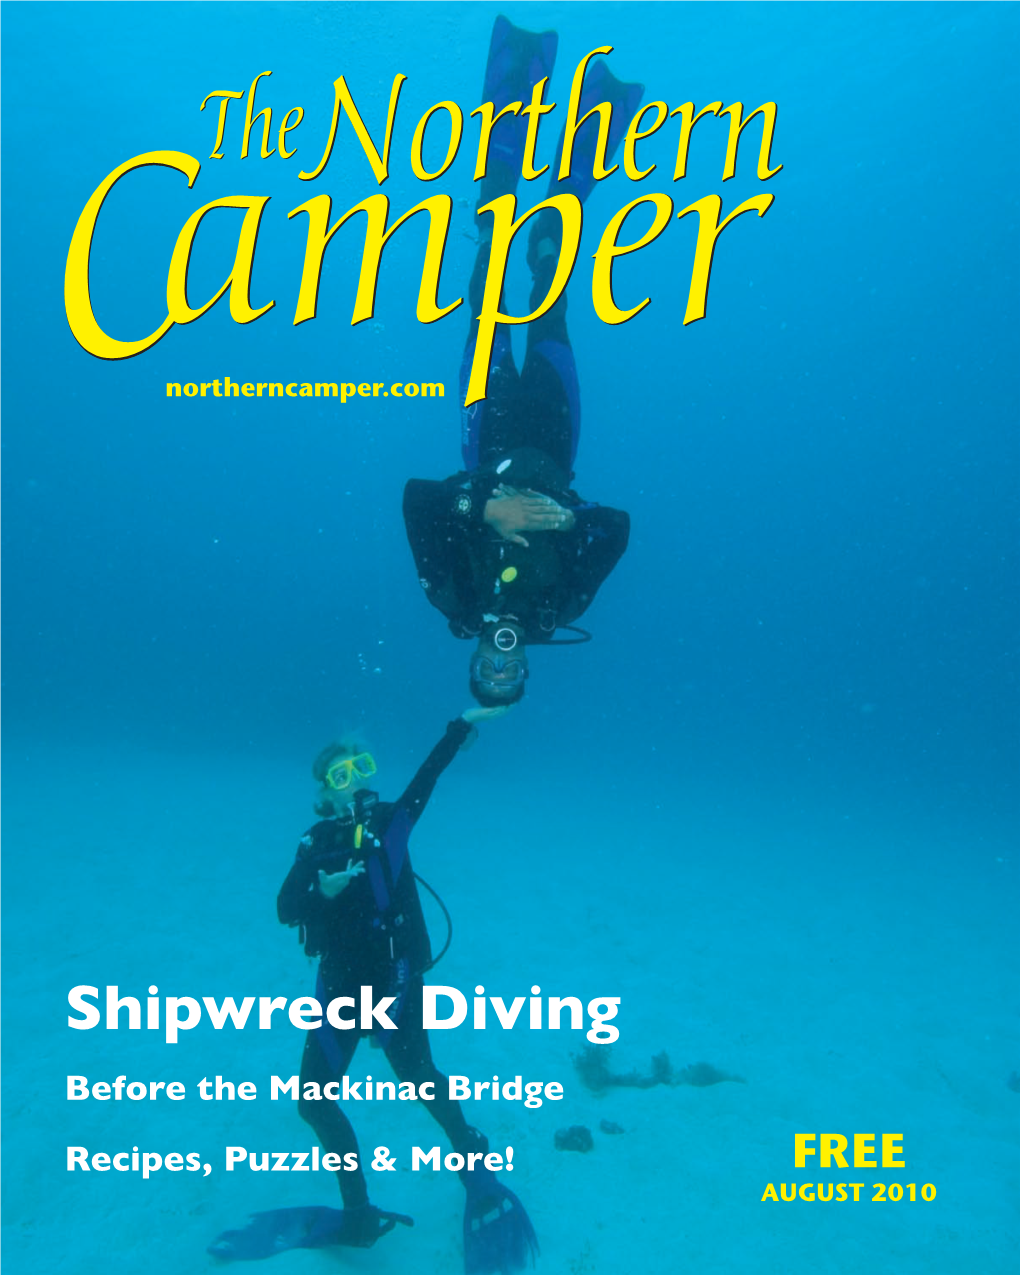 Shipwreck Diving Before the Mackinac Bridge Recipes, Puzzles & More! FREE AUGUST 2010 Stoney Creek